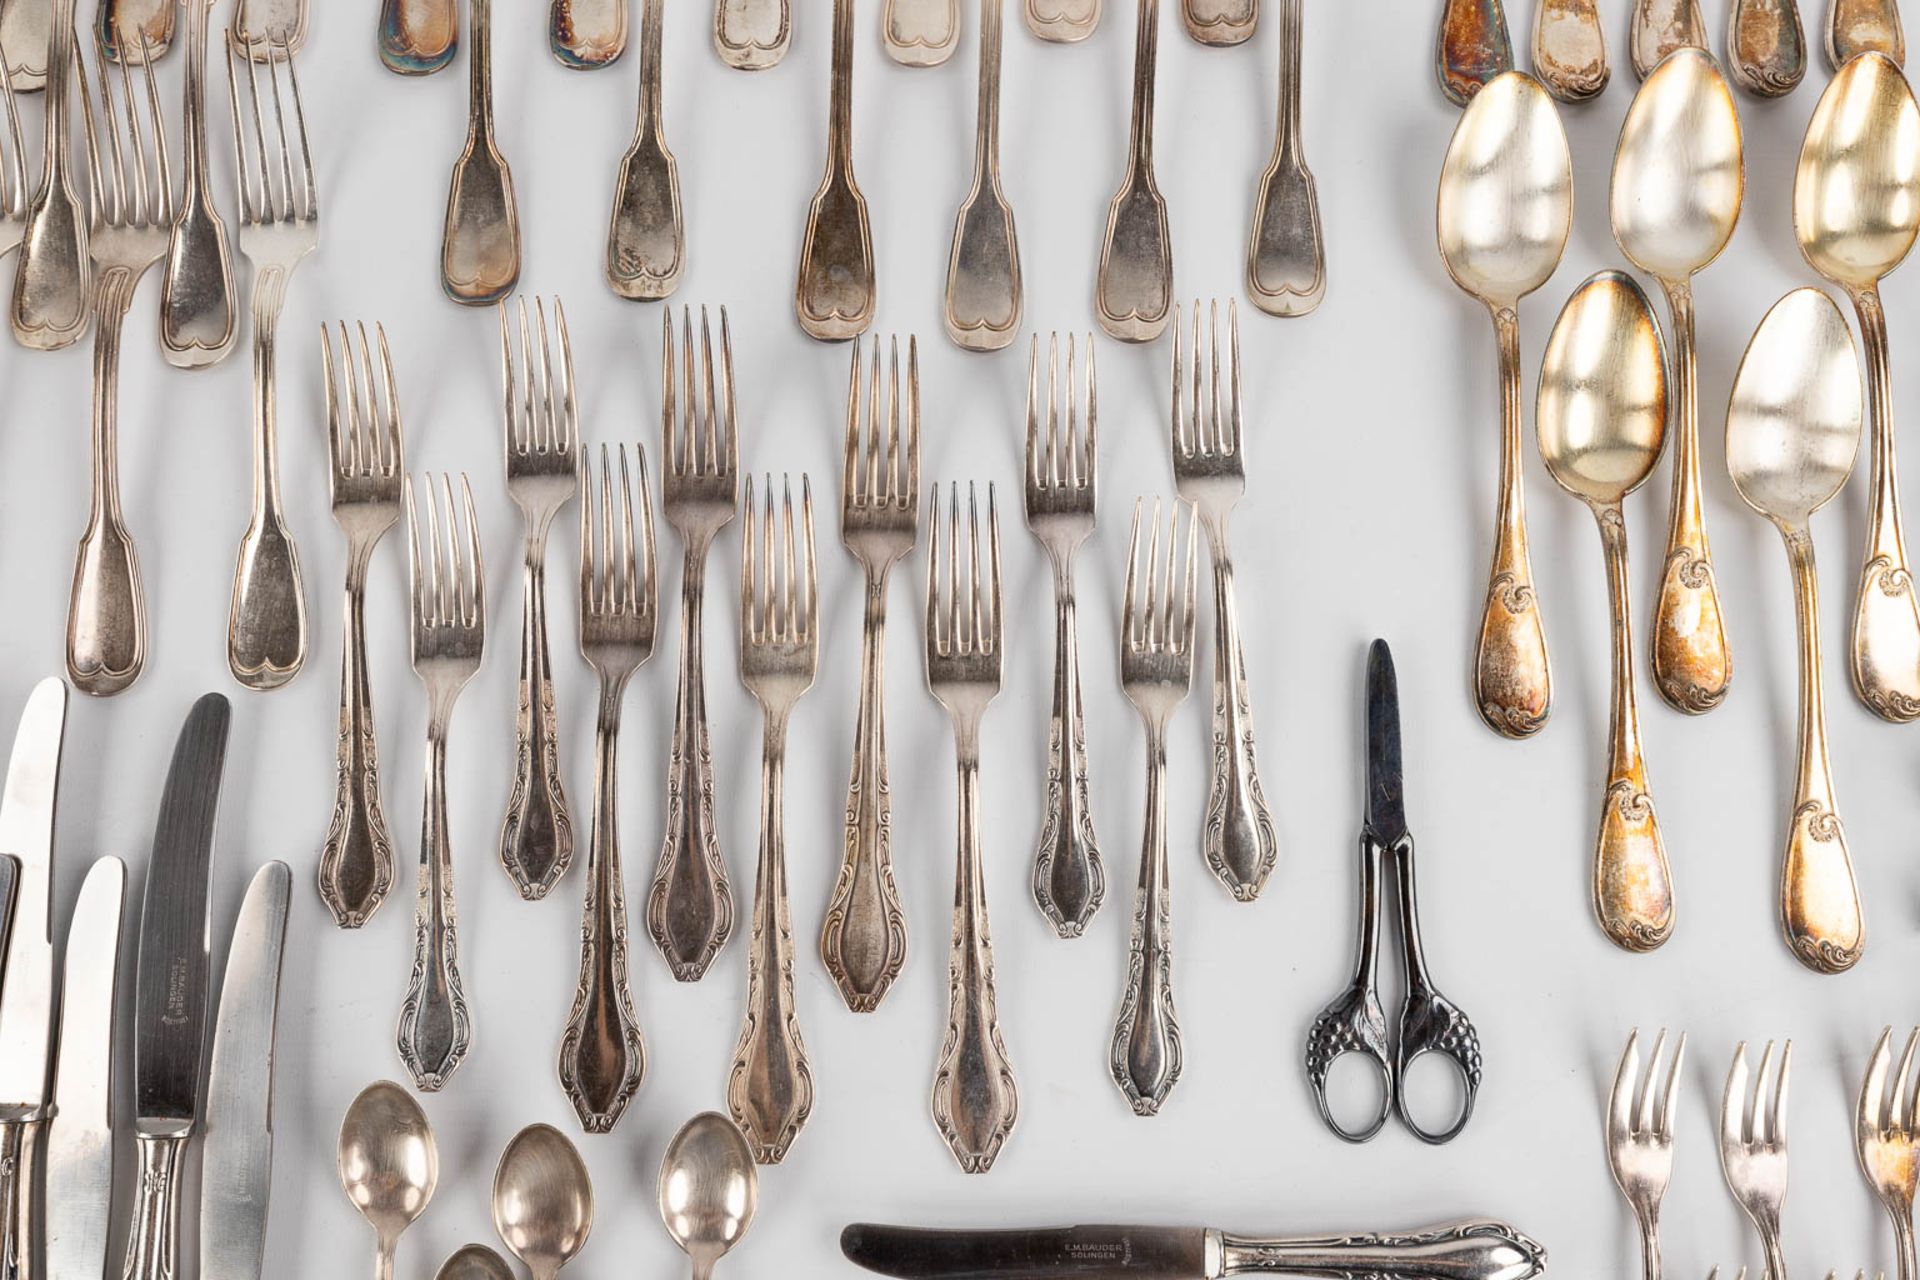 A large collection of serving accessories and cutlery, silver-plated metal. (W:35 cm) - Image 7 of 9